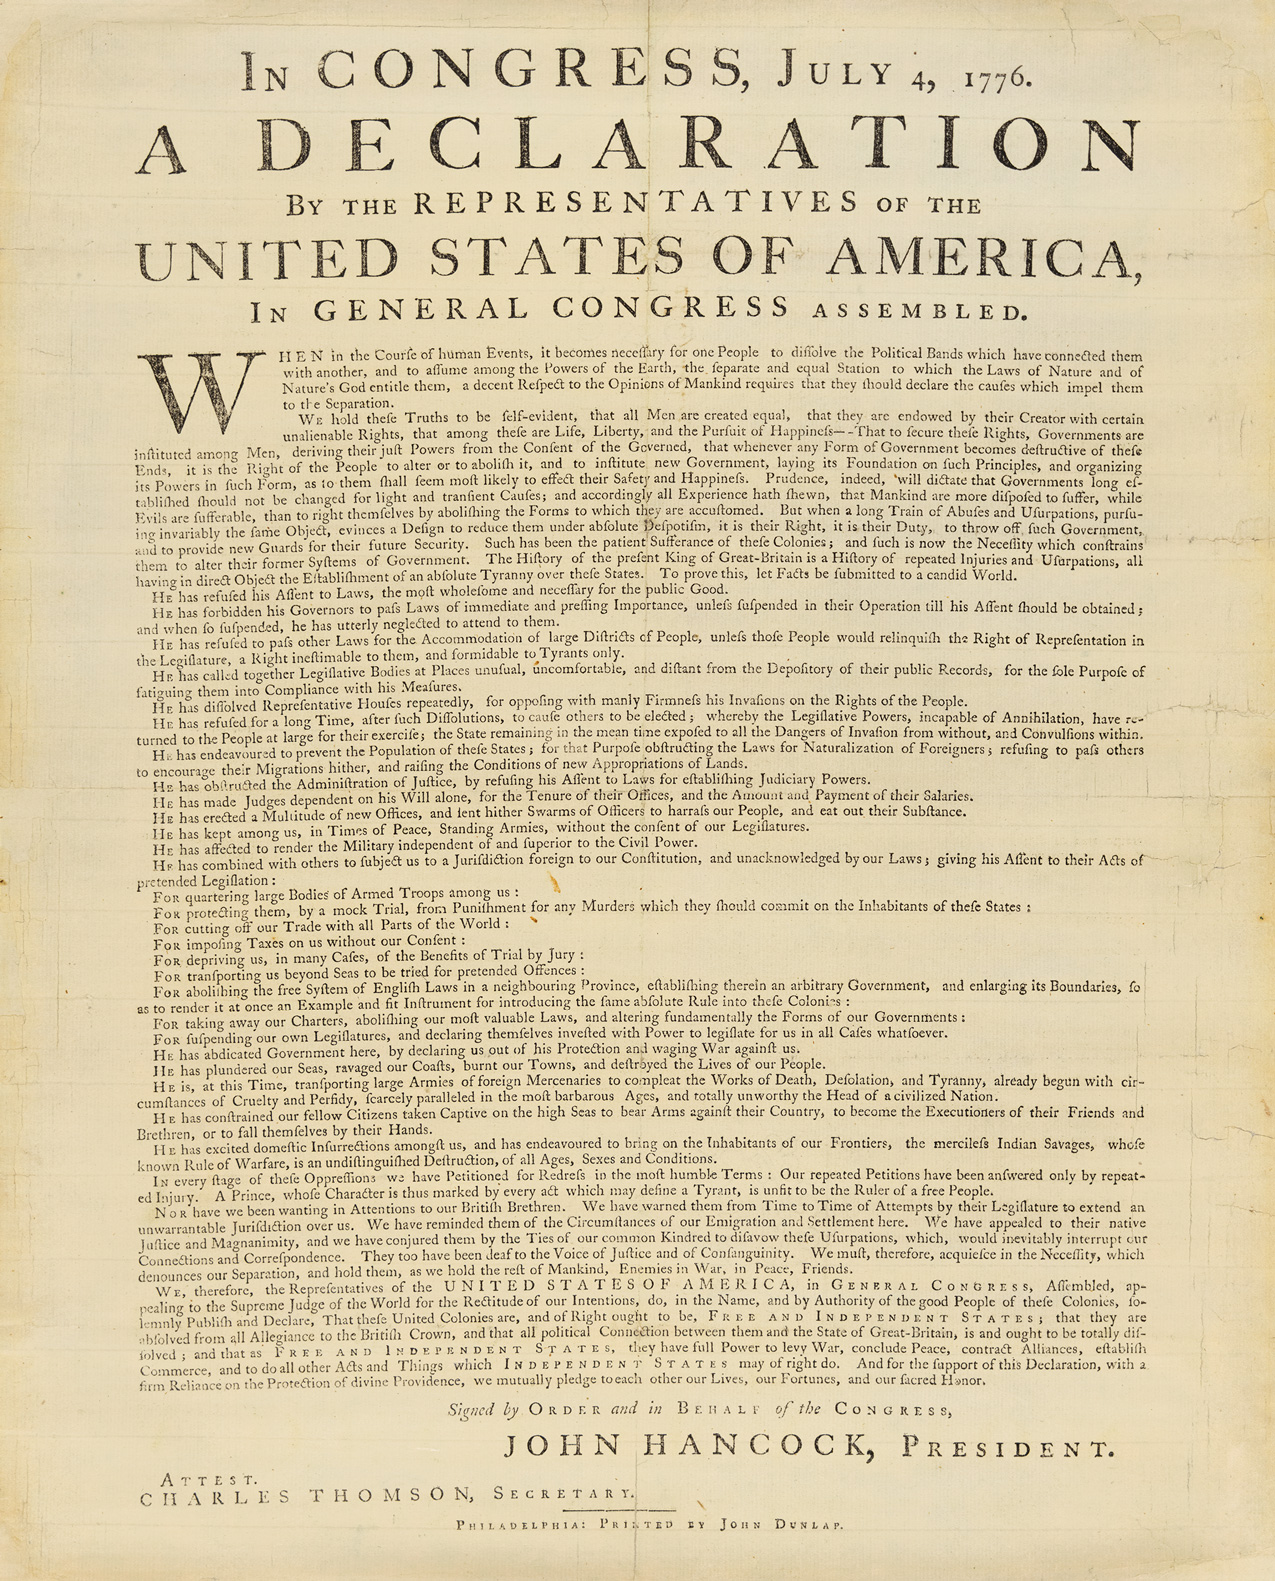 The Declaration of Independence, printed by John Dunlap and bearing the names of John Hancock, President, and Charles Thomson, Secretary. Thomson was born in County Londonderry and Hancock is thought to have had County Down ancestry. On 28 July 1775 Hancock signed Congress’s Address To The People of Ireland. In 1785–6, Hancock was succeeded in his role on the Continental Congress by David Ramsay whose parents were from Ulster.